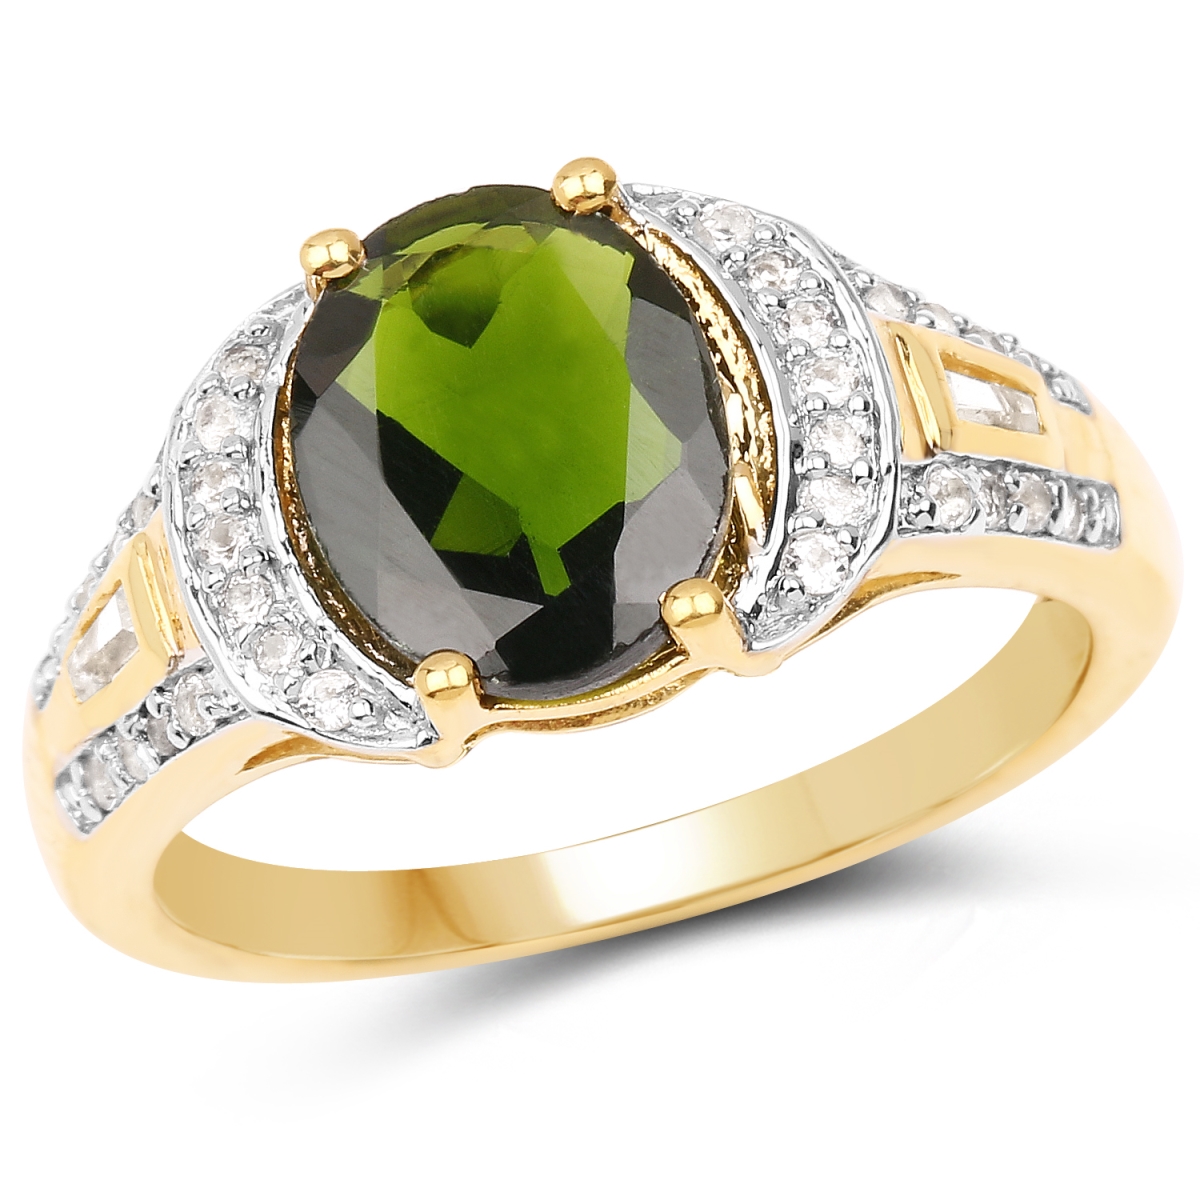 Picture of Malaika QR9899CDWT-SS18KY-8 18K Yellow Gold Plated 2.79 Carat Genuine Chrome Diopside & White Topaz 0.925 Sterling Silver Ring